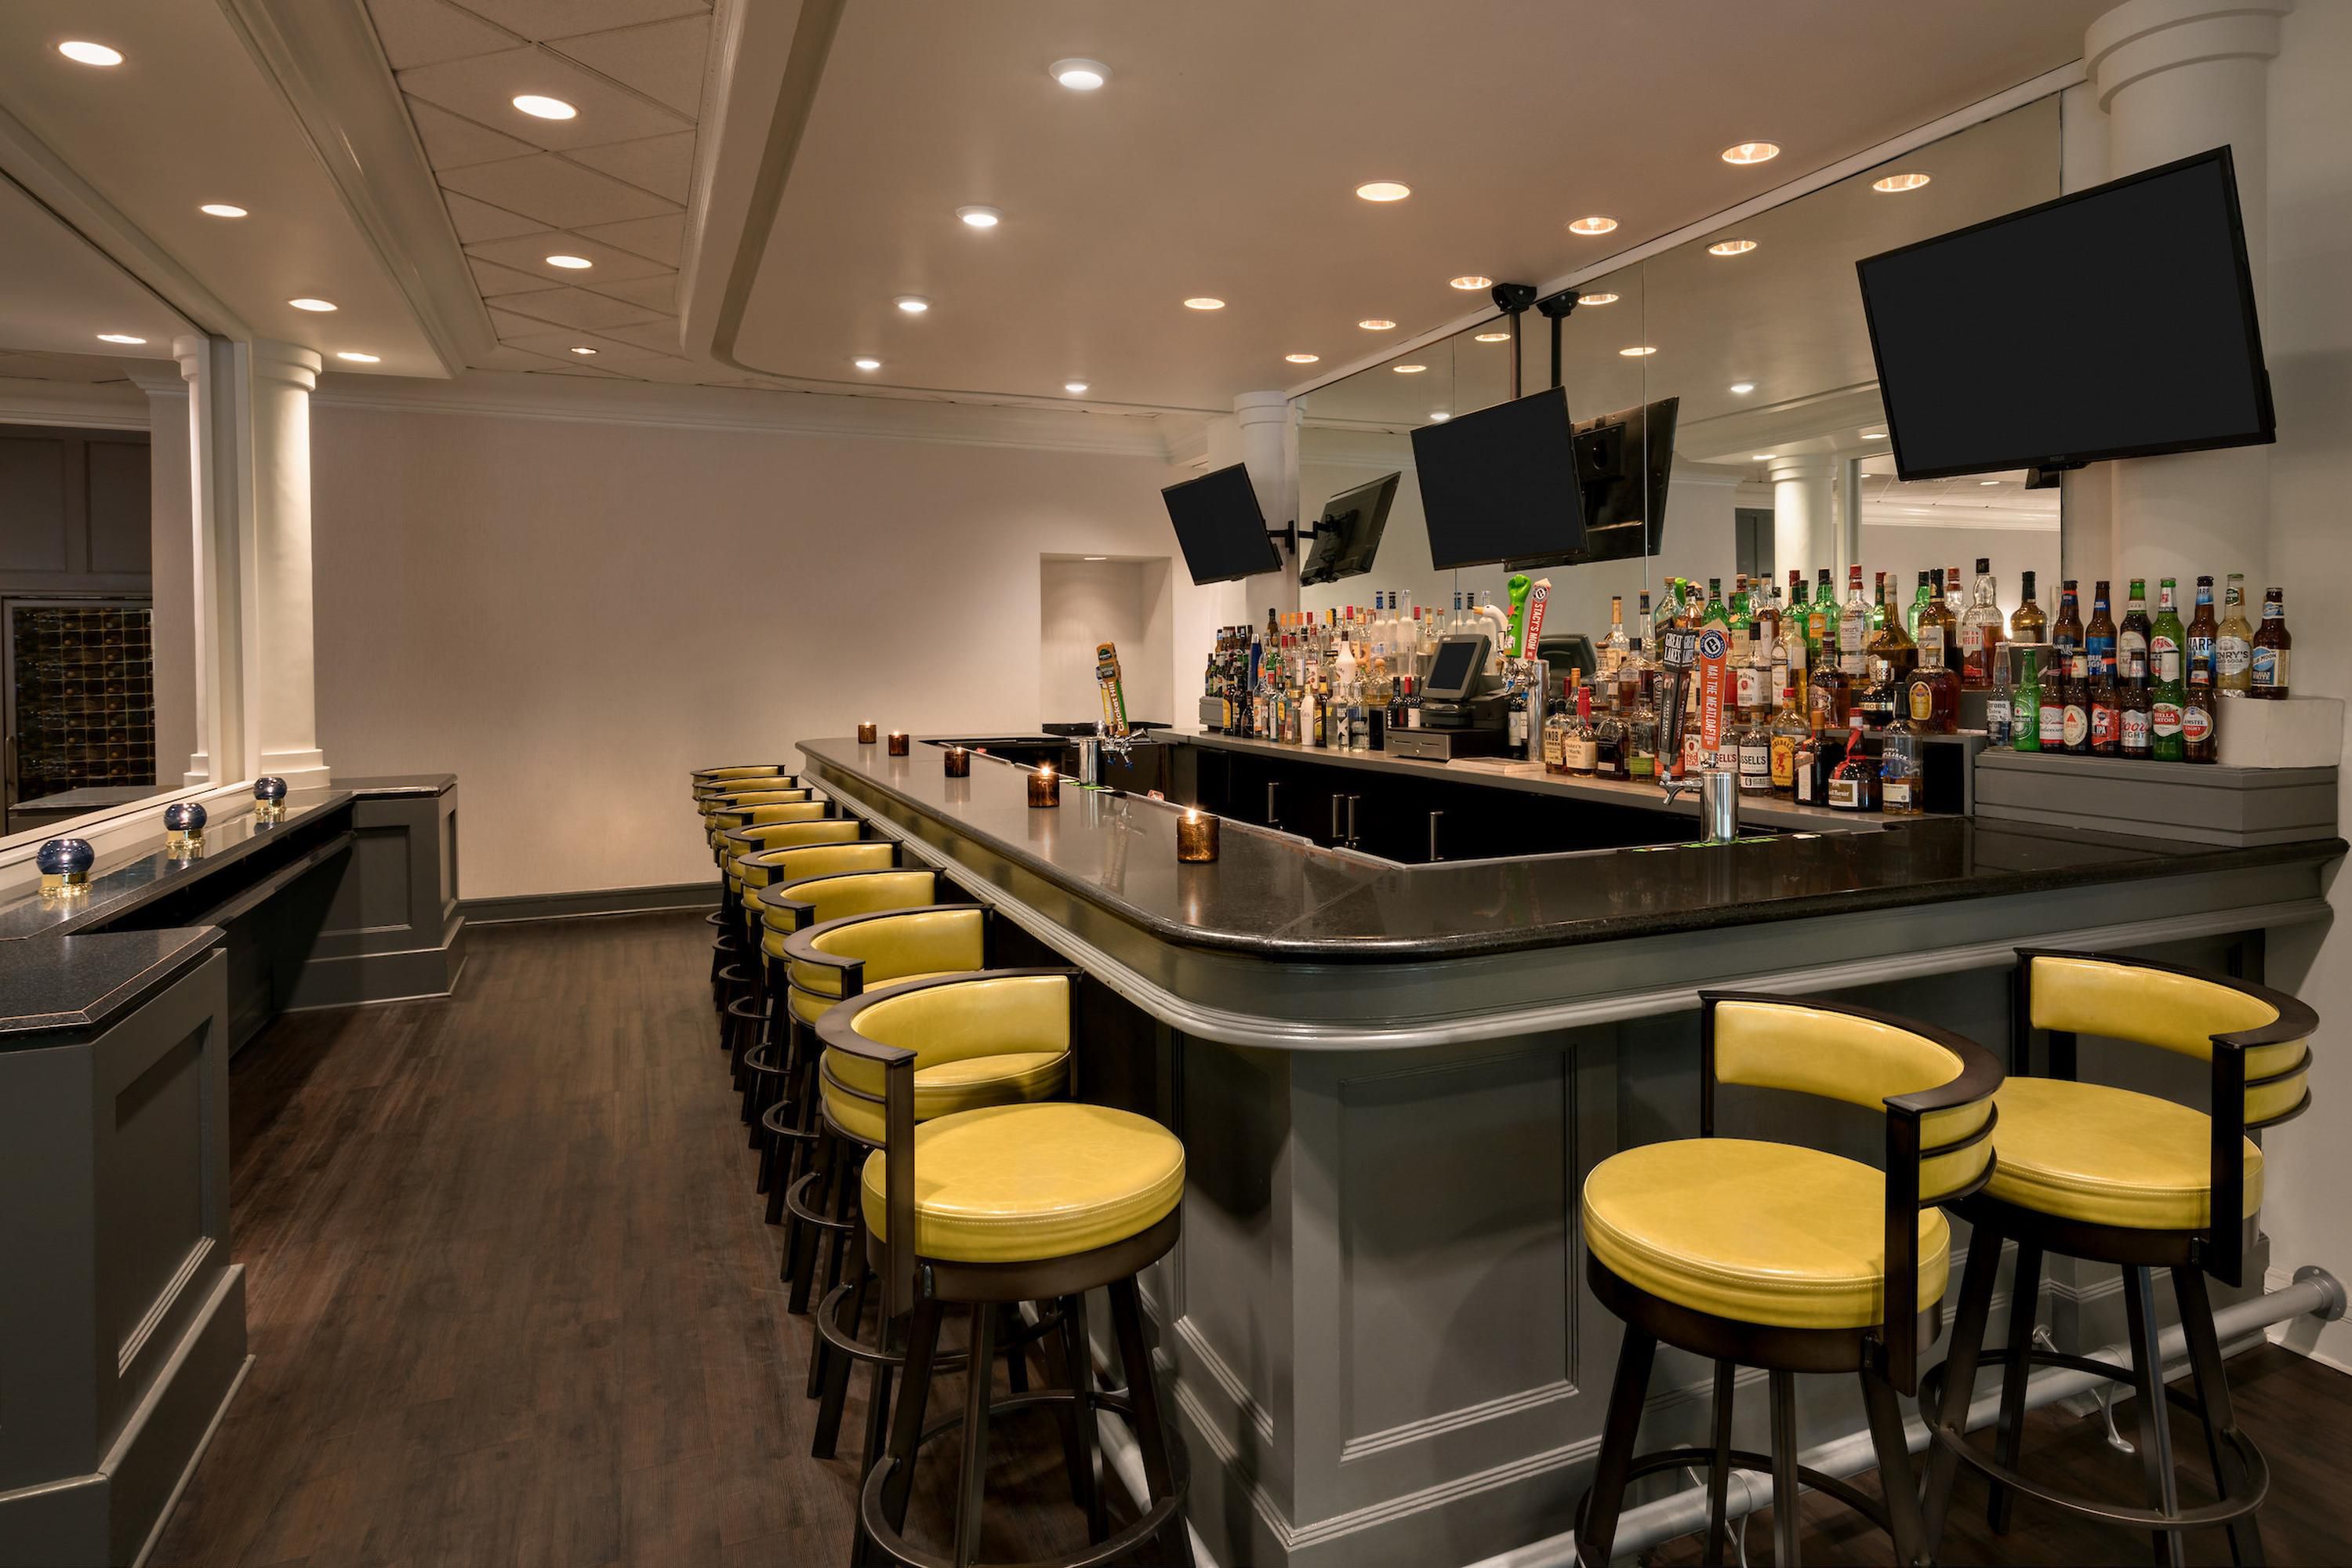 Enjoy a delightful entrée or a delicious drink at our onsite bar